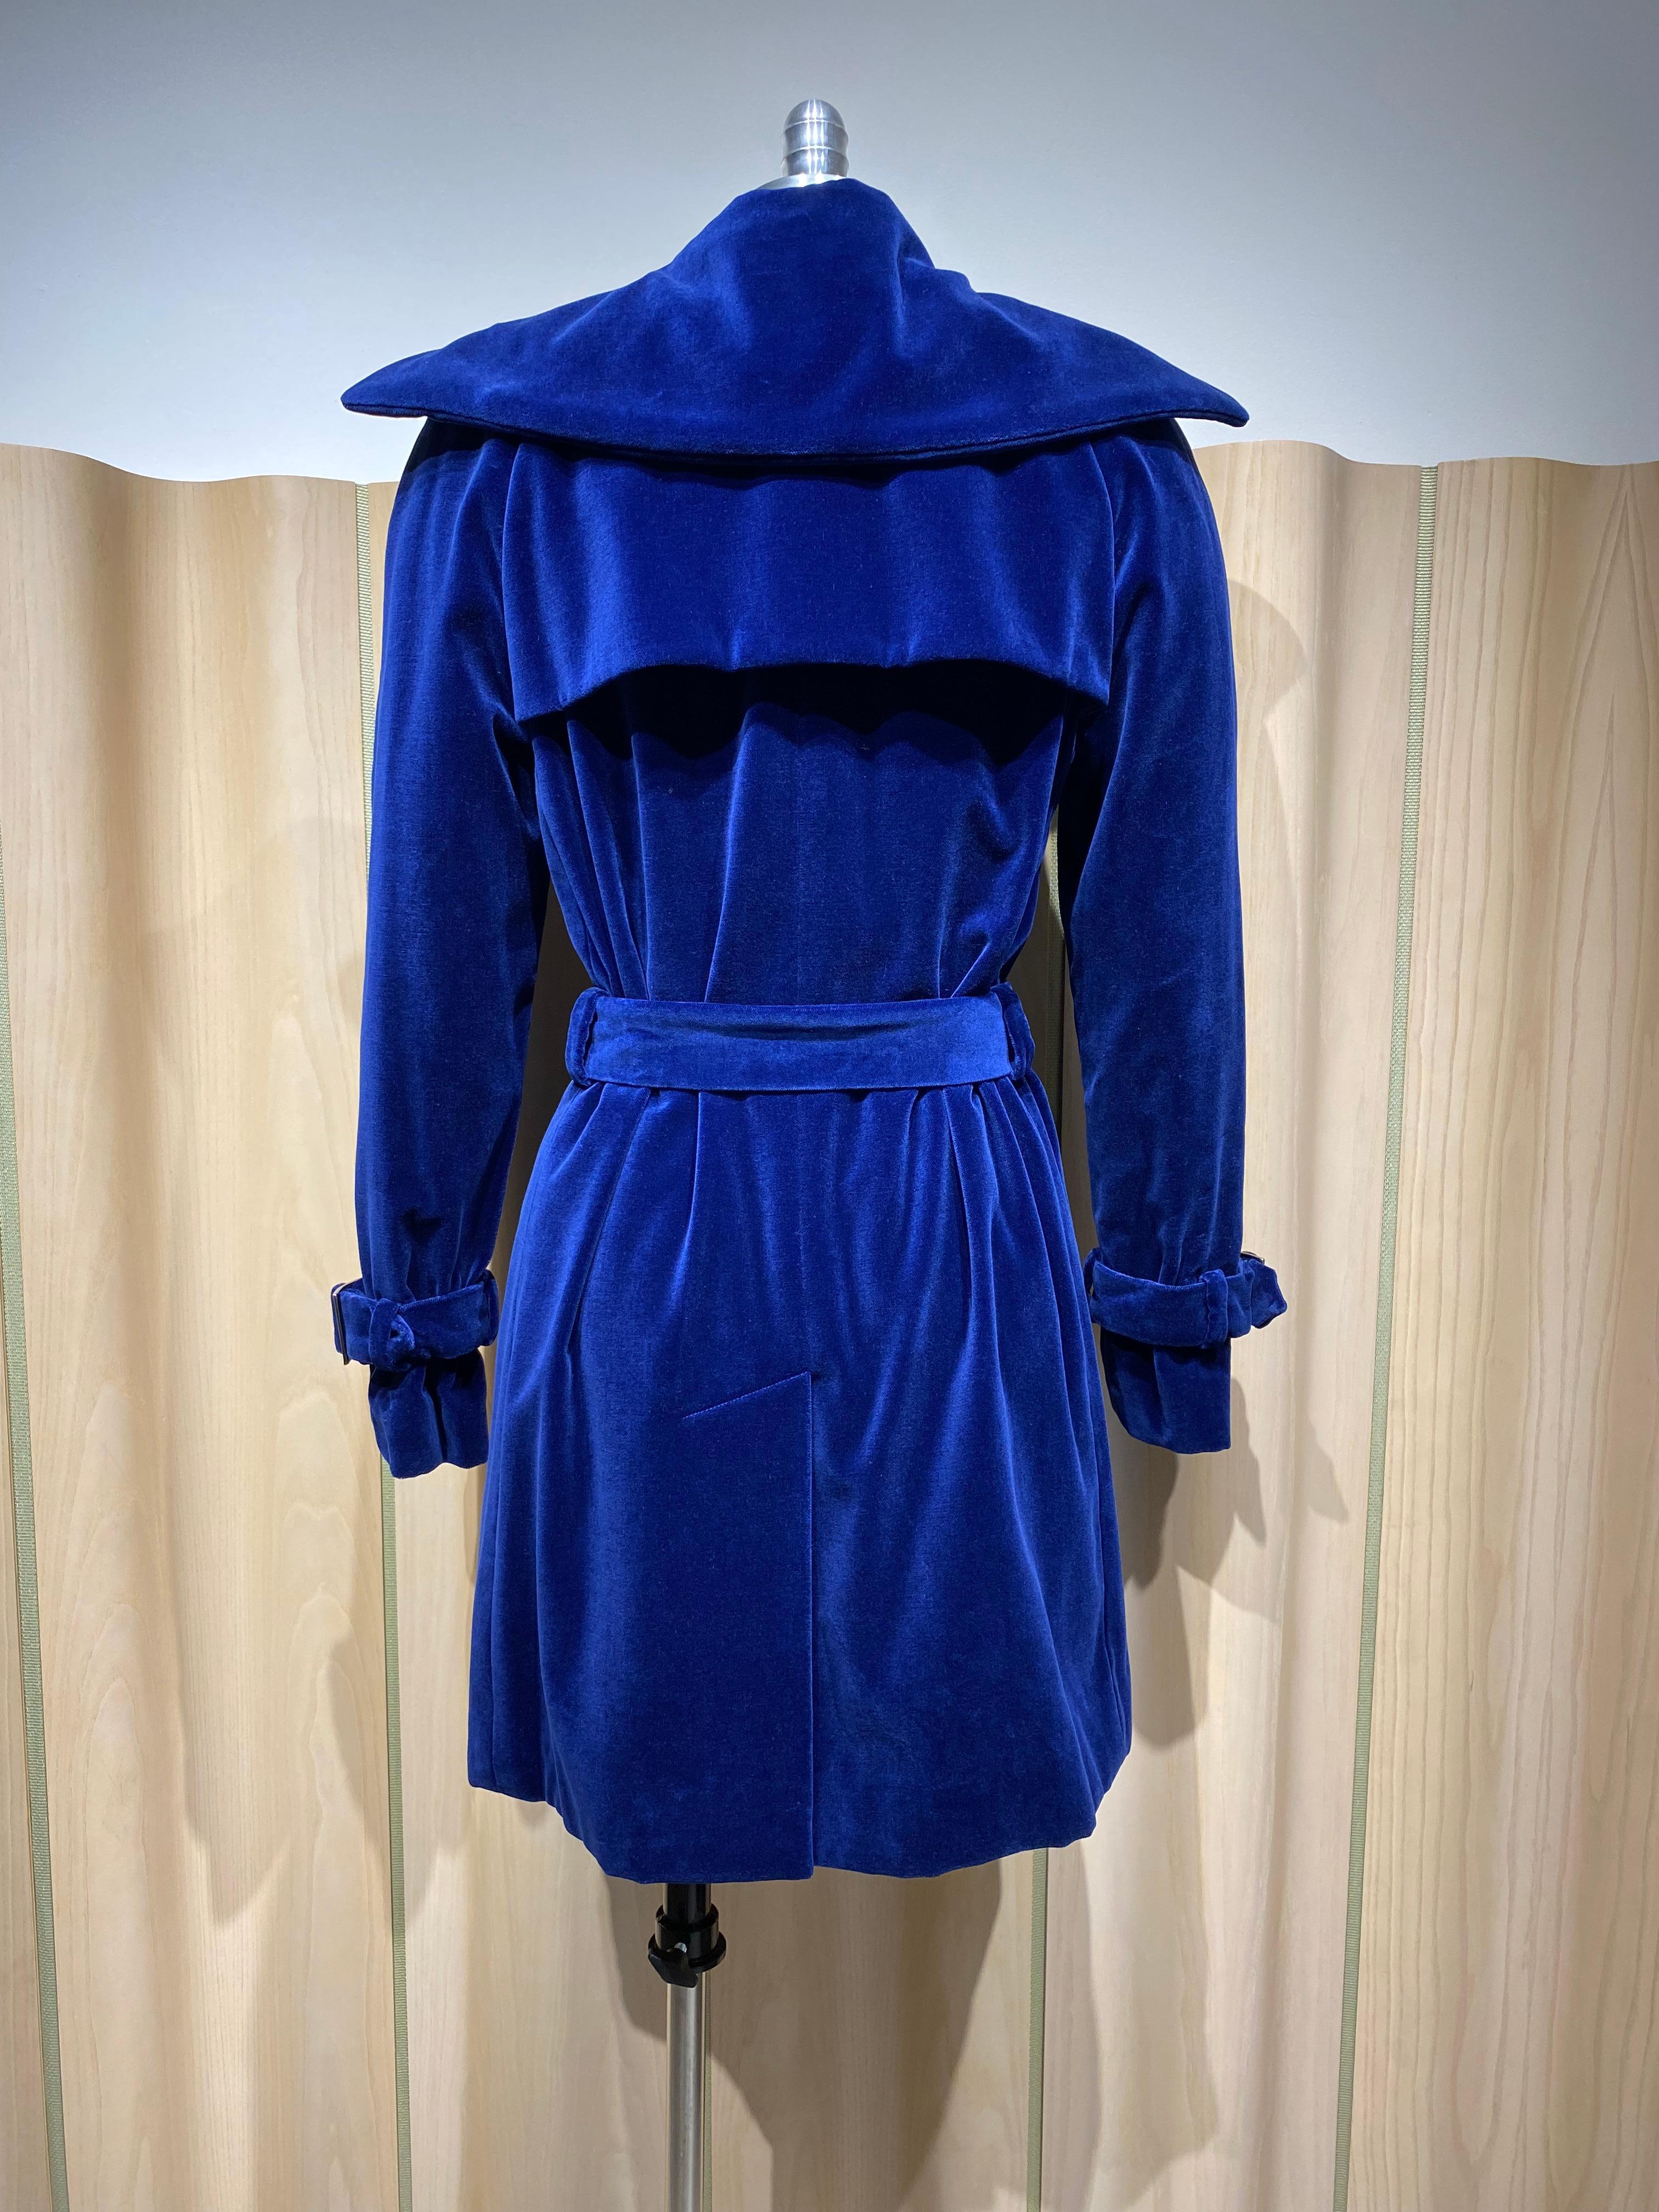 CHANEL Blue velvet double breast coat with large lapel and belt . Coat lined in silk and has 2 pockets. 
Marked size 38
Measurement: Shoulder: 15.5” / Bust 38” / Waist 34” / Hip 38”/ Sleeves: 24.5” / Coat length: 33”